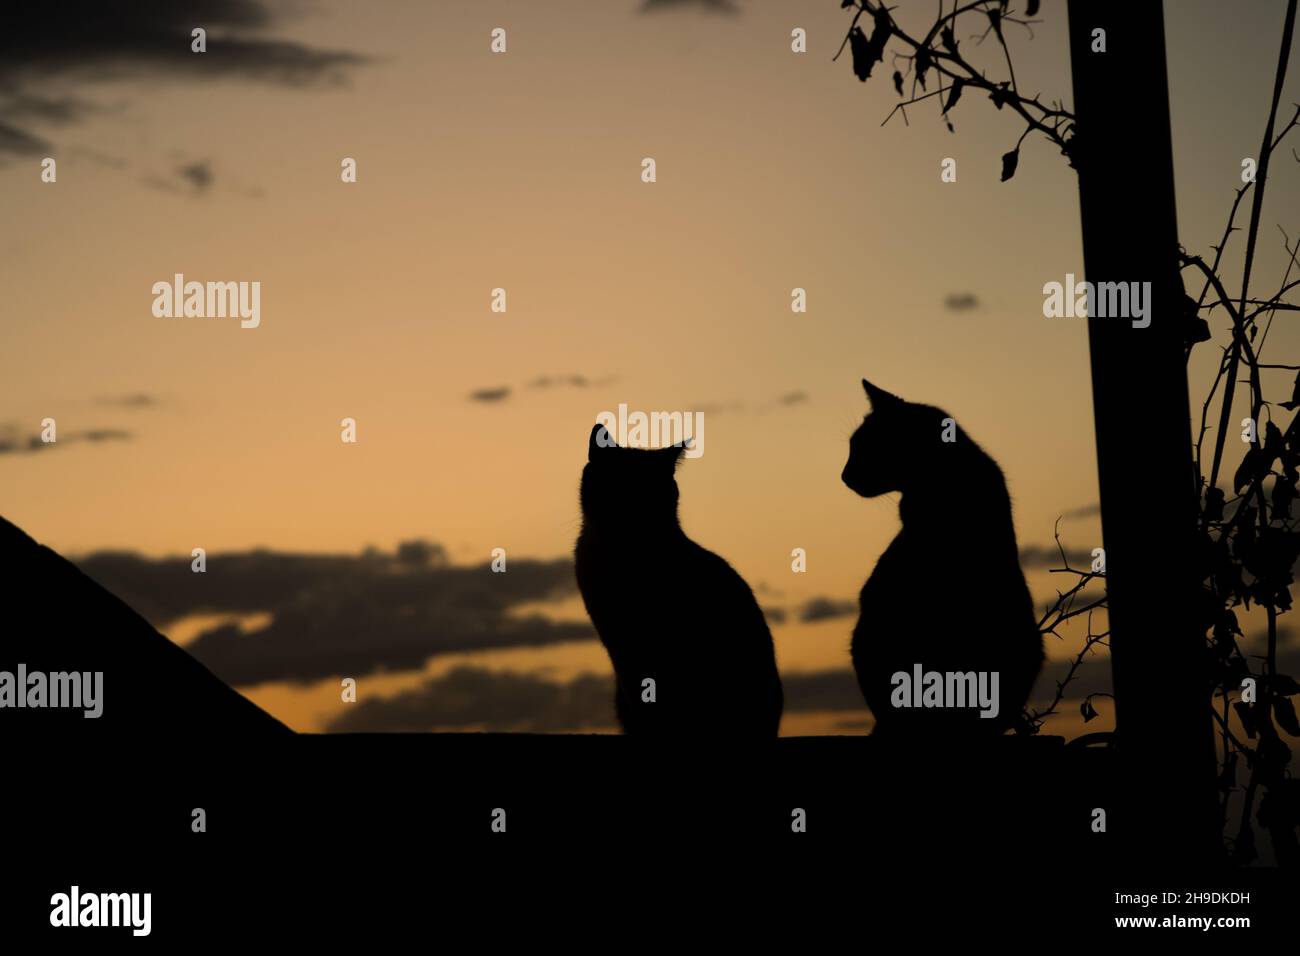 Silhouettes of two cats against a warm post sunset sky Stock Photo